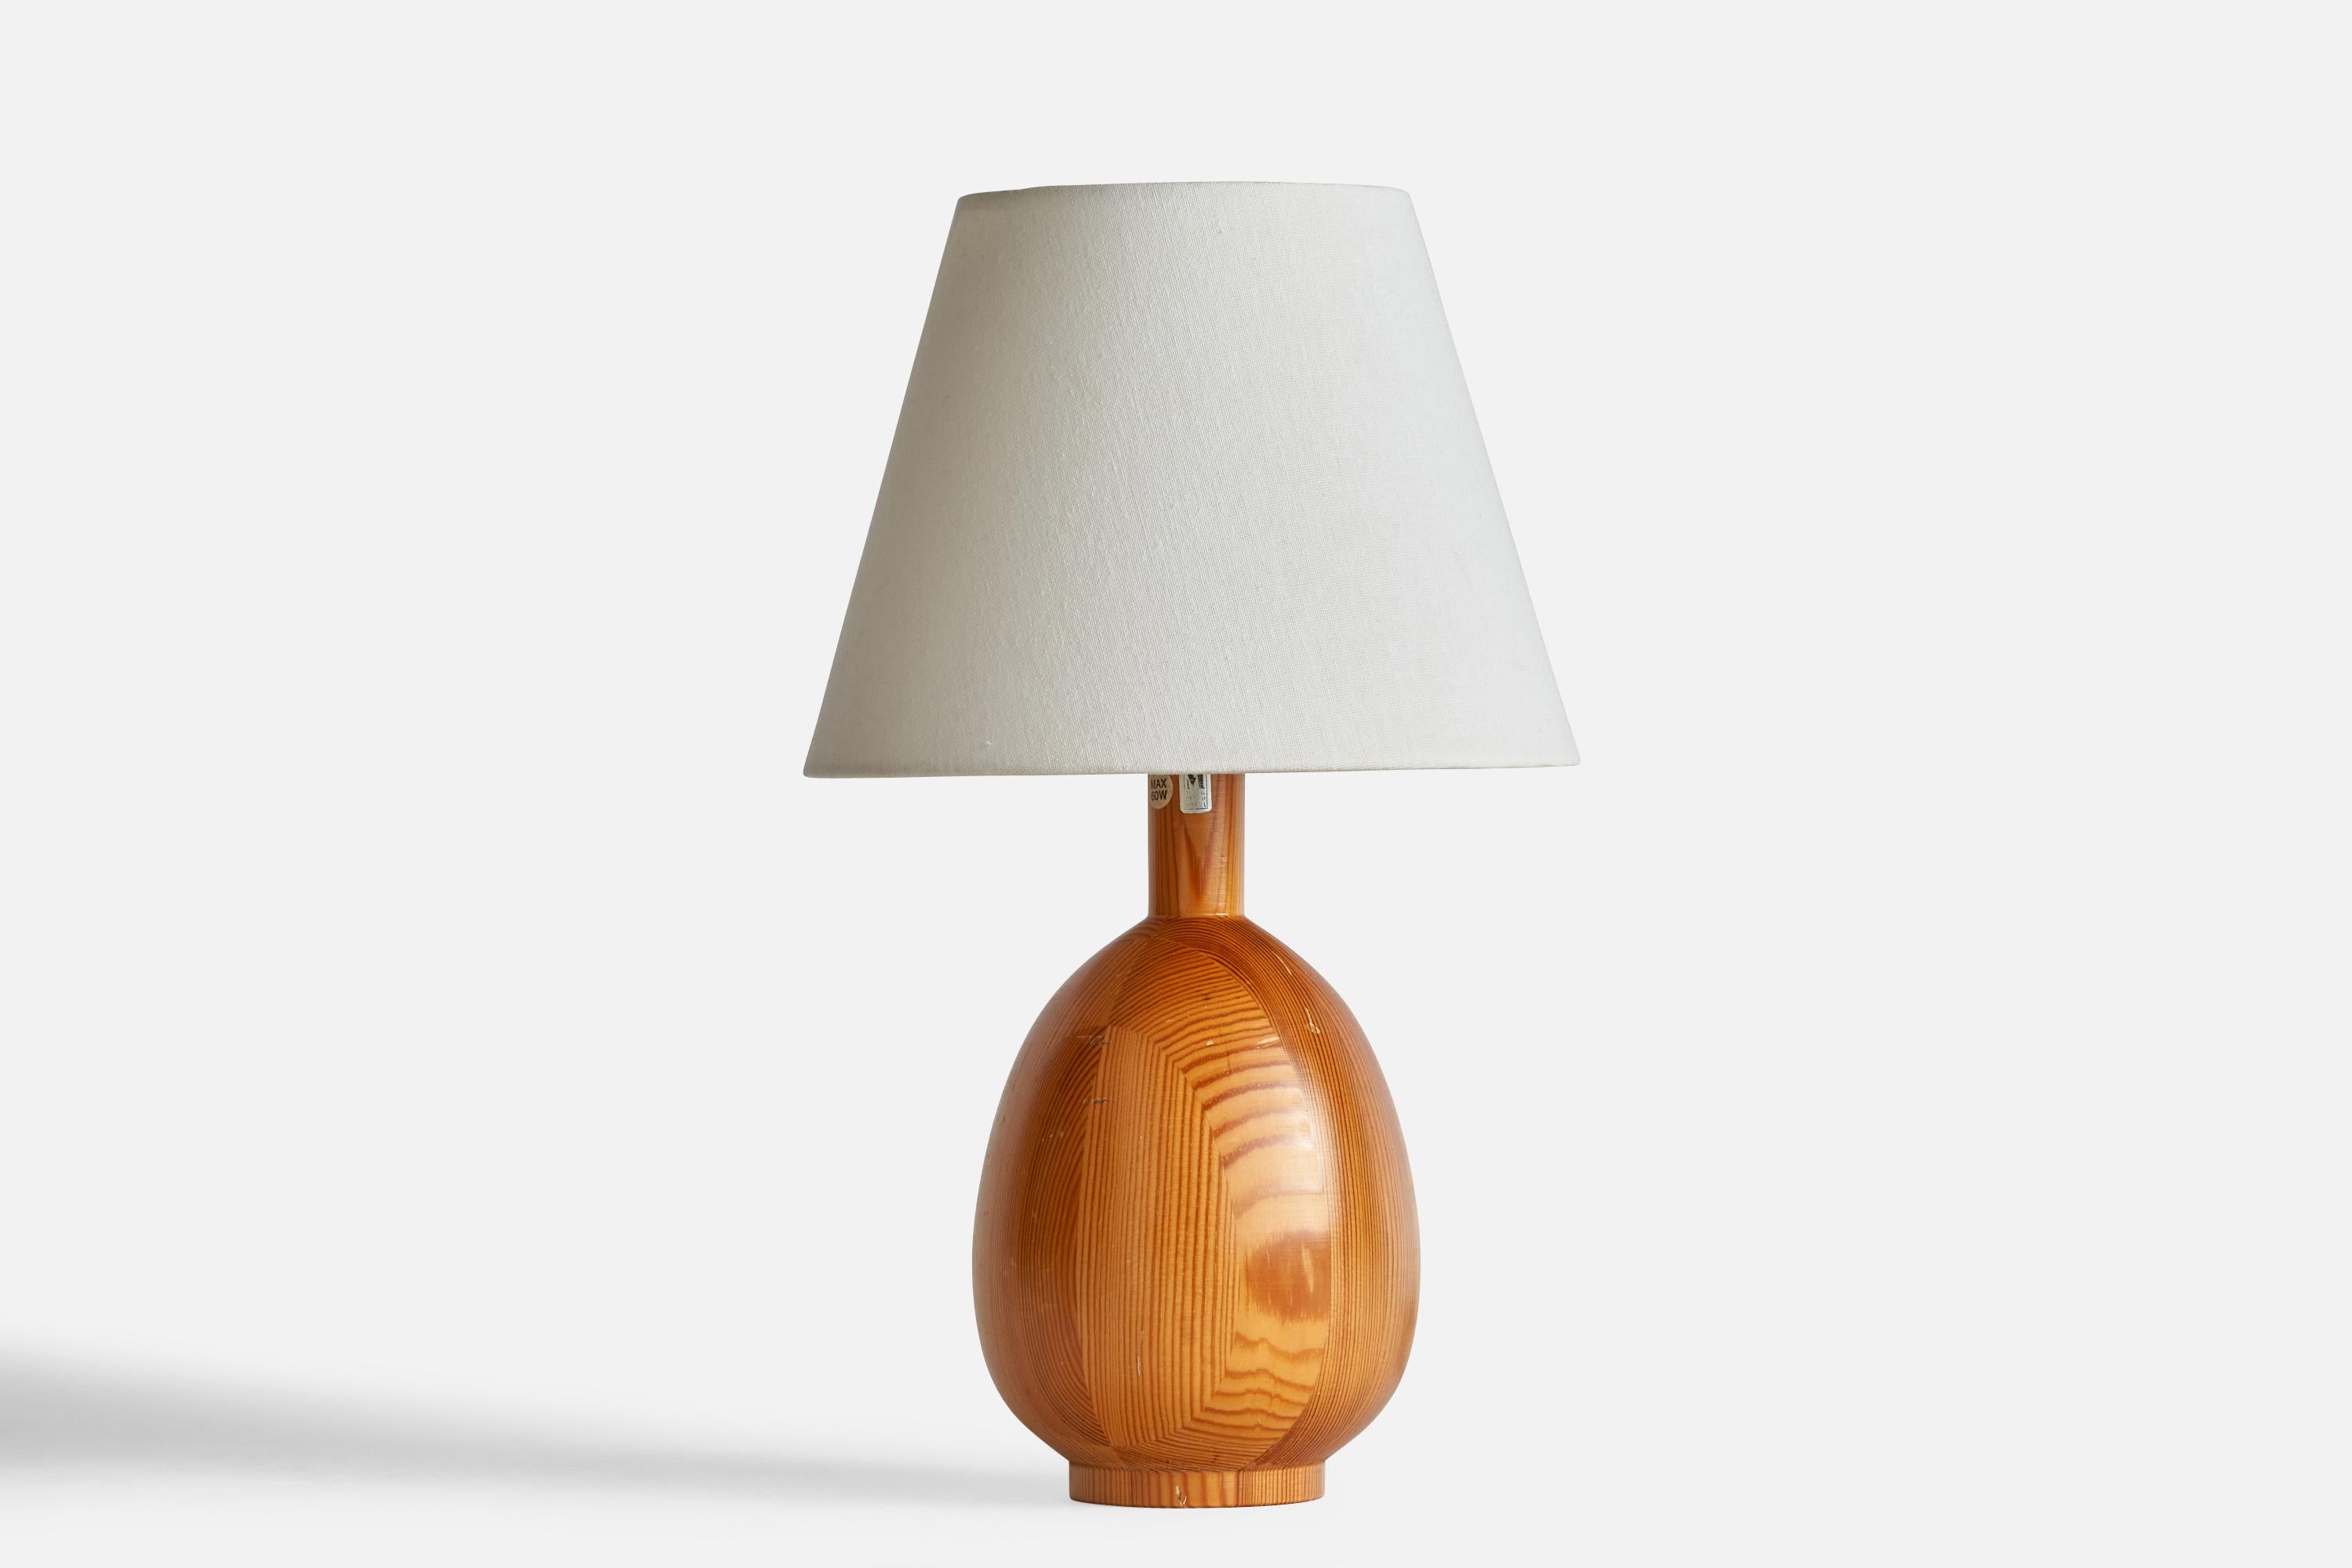 A pine table lamp designed and produced by Markslöjd, Sweden, 1970s.

Dimensions of Lamp (inches): 11.5” H x 5.5” Diameter
Dimensions of Shade (inches): 5.5” Top Diameter x 9.5” Bottom Diameter x 9.9